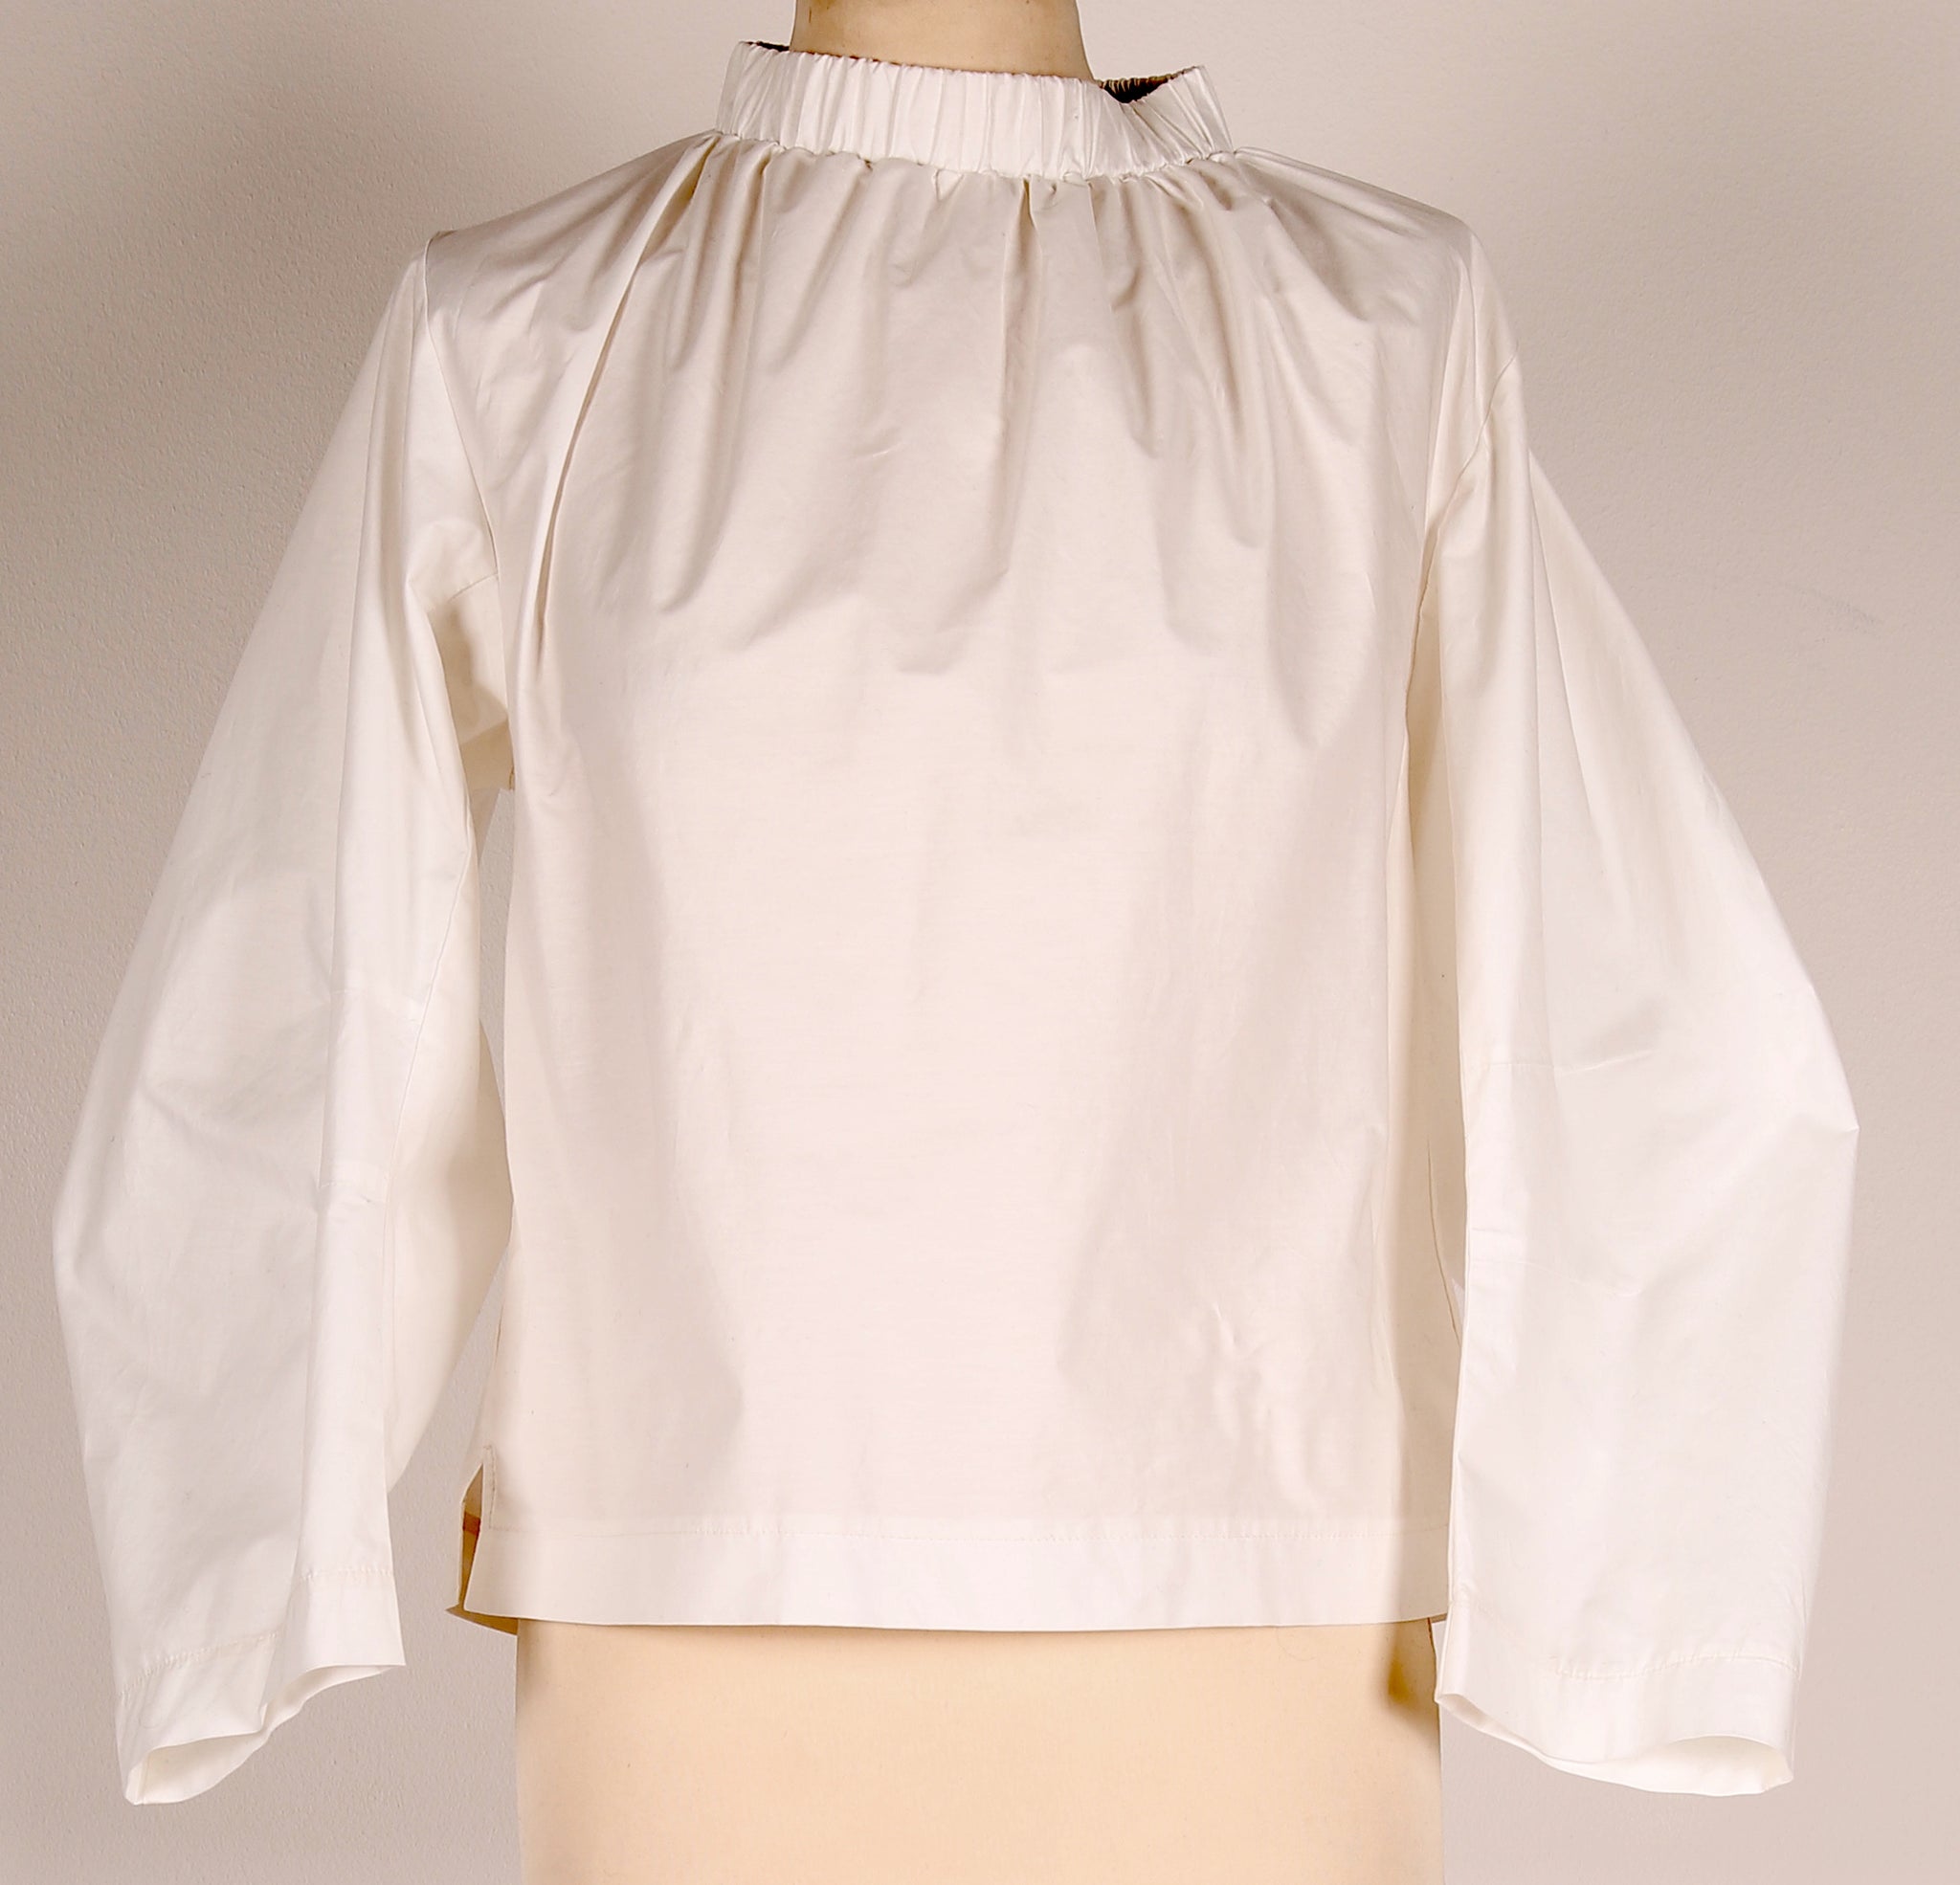 White Blouse With a Gathering